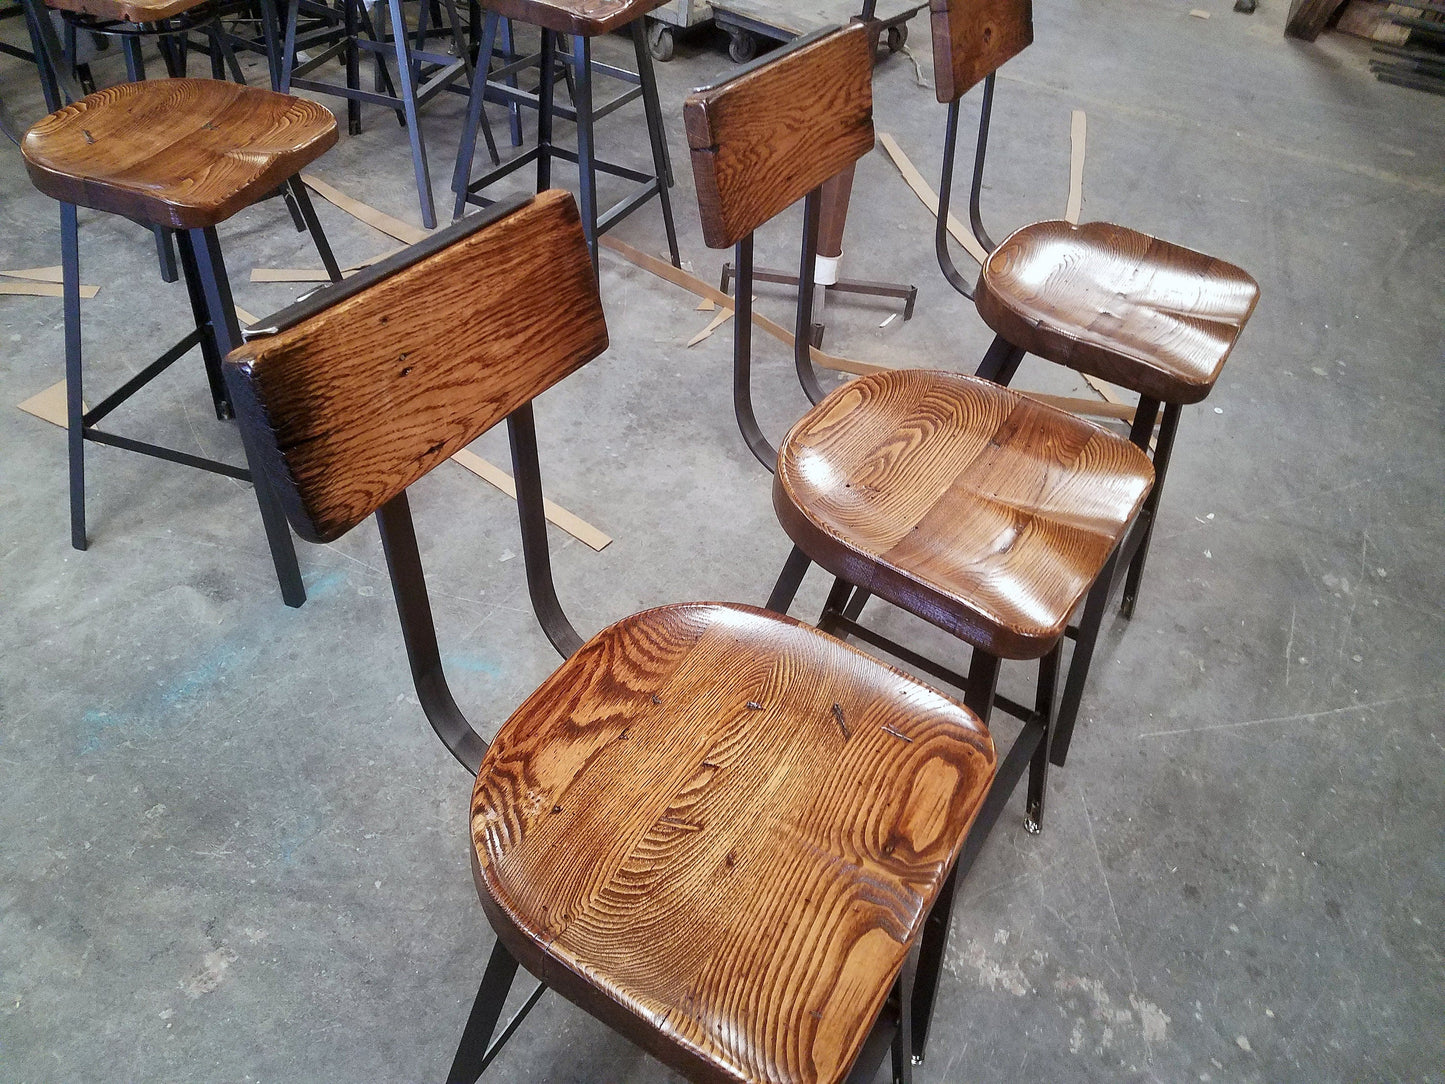 Set of 4 Bar Stools Counter Height, Bar Stools With Backs, Scooped Seat Brewster Stools, Counter Stools, Reclaimed Bar Stool,Home Decor Gift